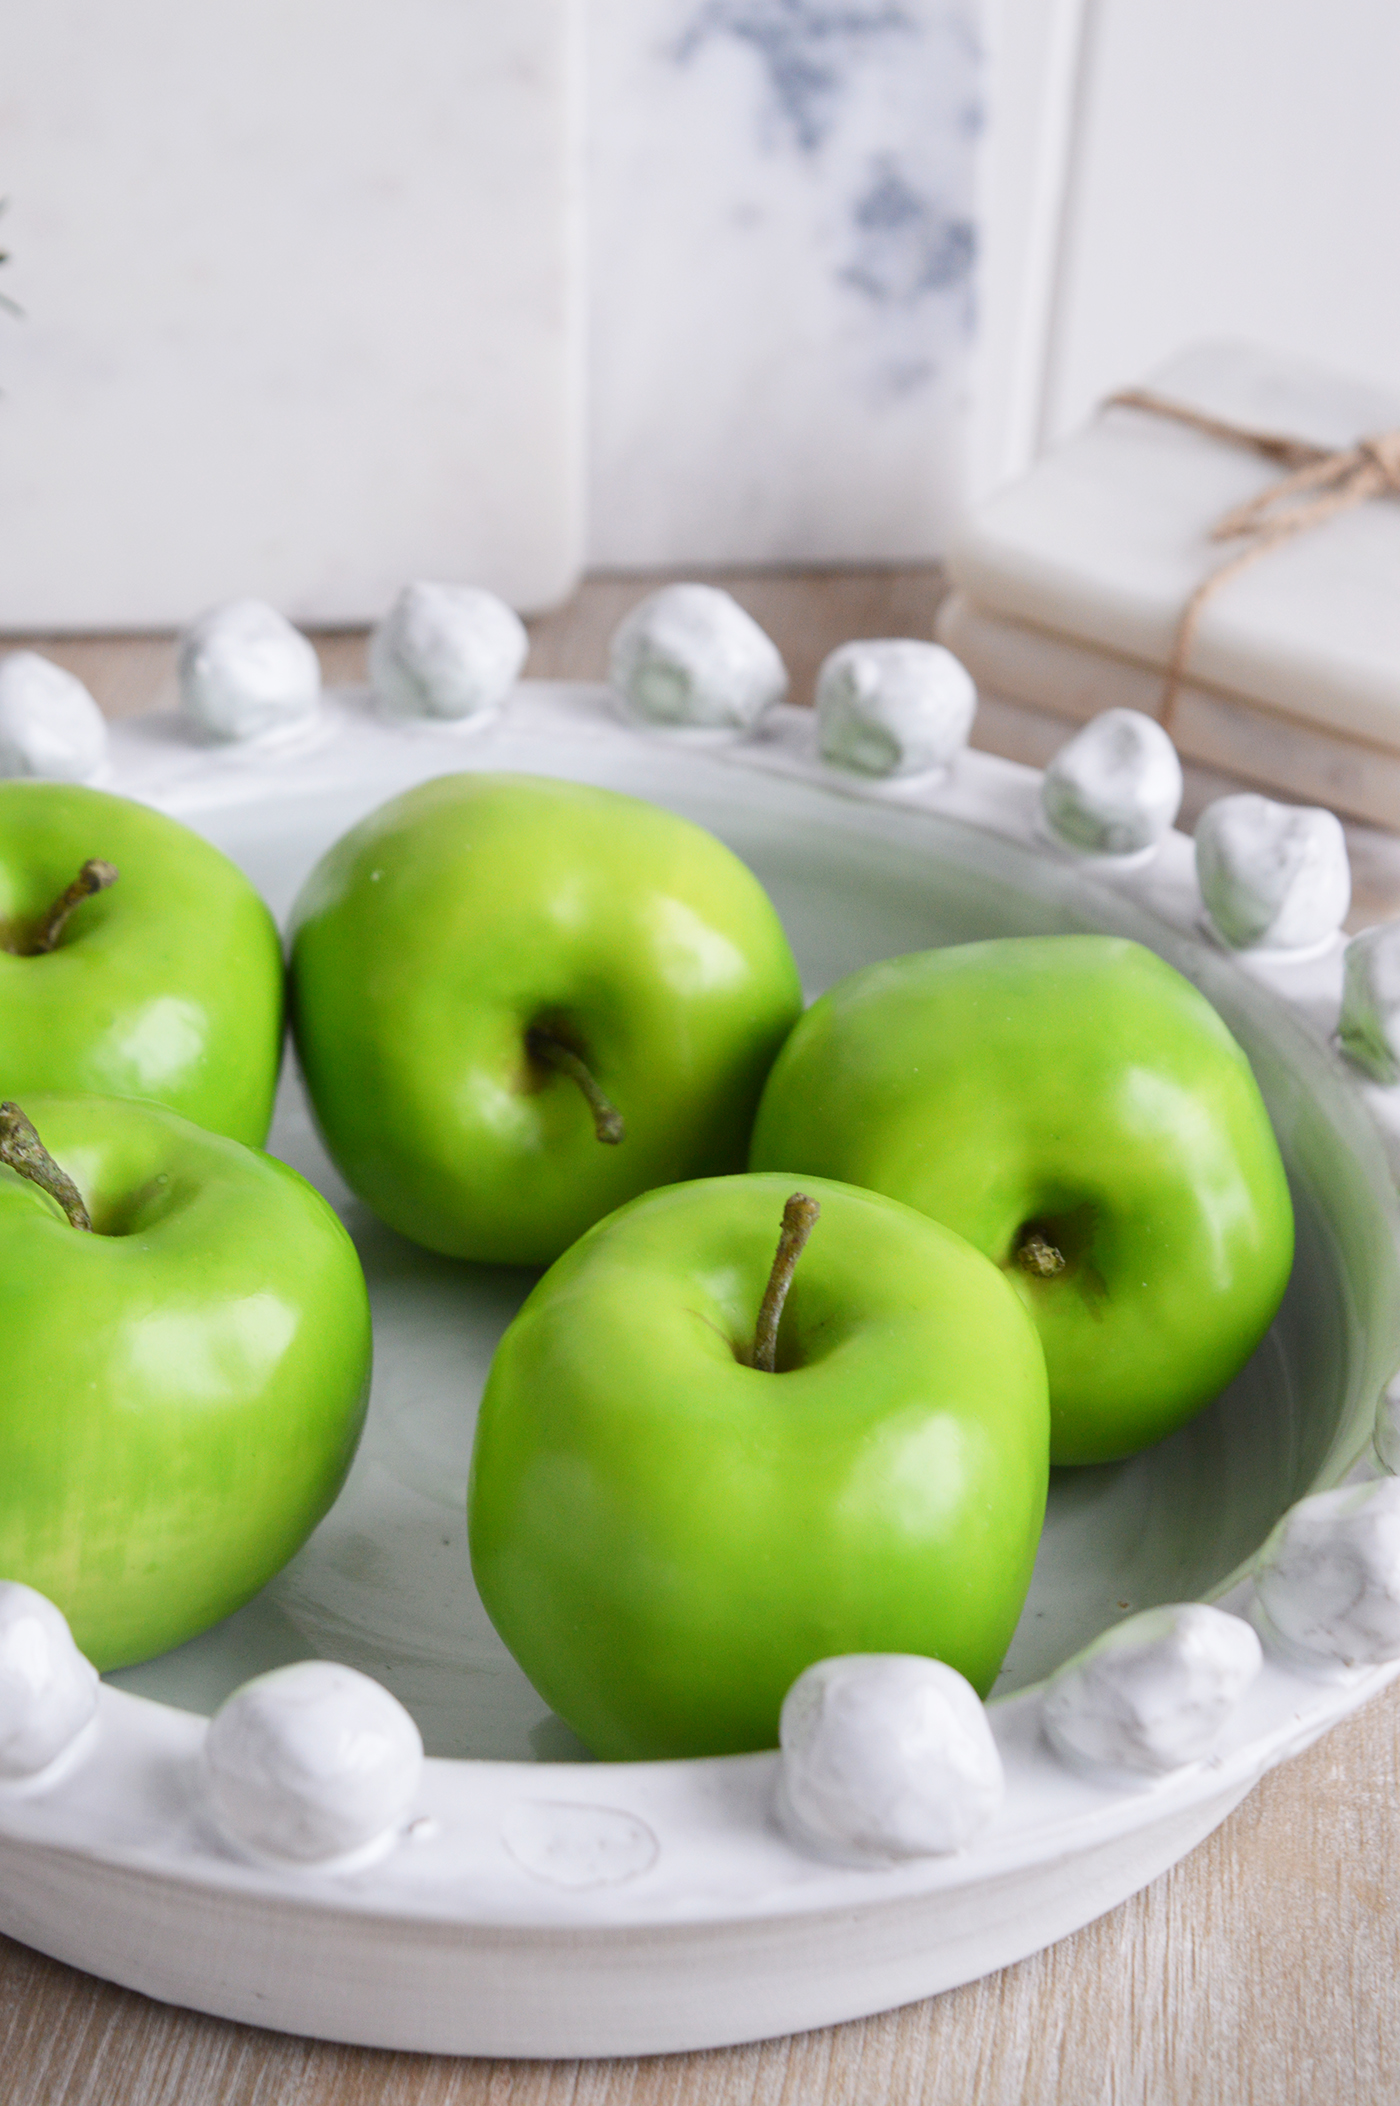 Add a touch of colour to your home with our beautiful, truly lifelike, Granny Smith apples.

Add to a fruit bowl or glass jar for a gorgeous display on your counter top or dining table, perfect to compleme

